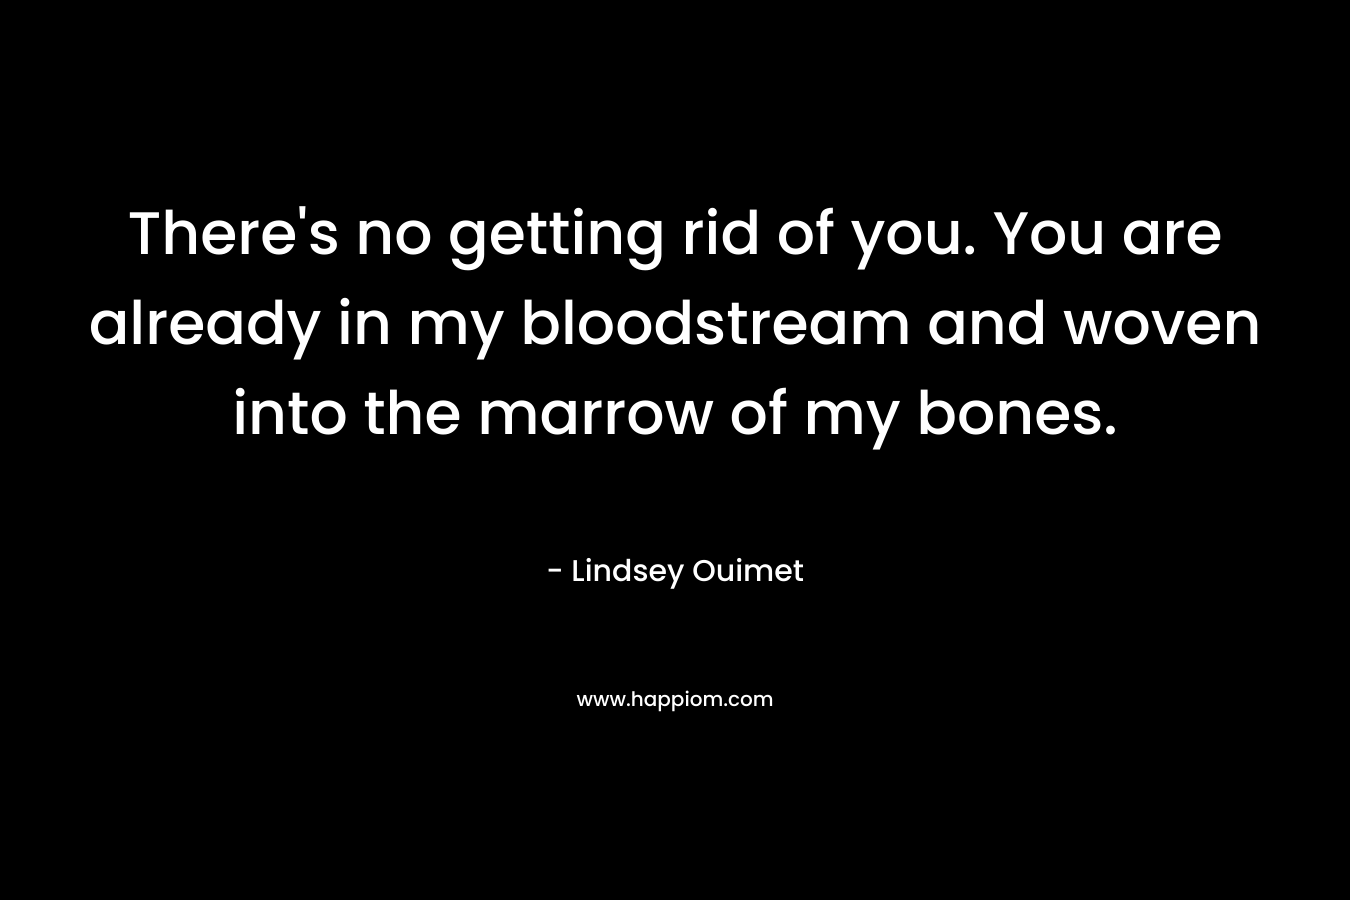 There’s no getting rid of you. You are already in my bloodstream and woven into the marrow of my bones. – Lindsey Ouimet